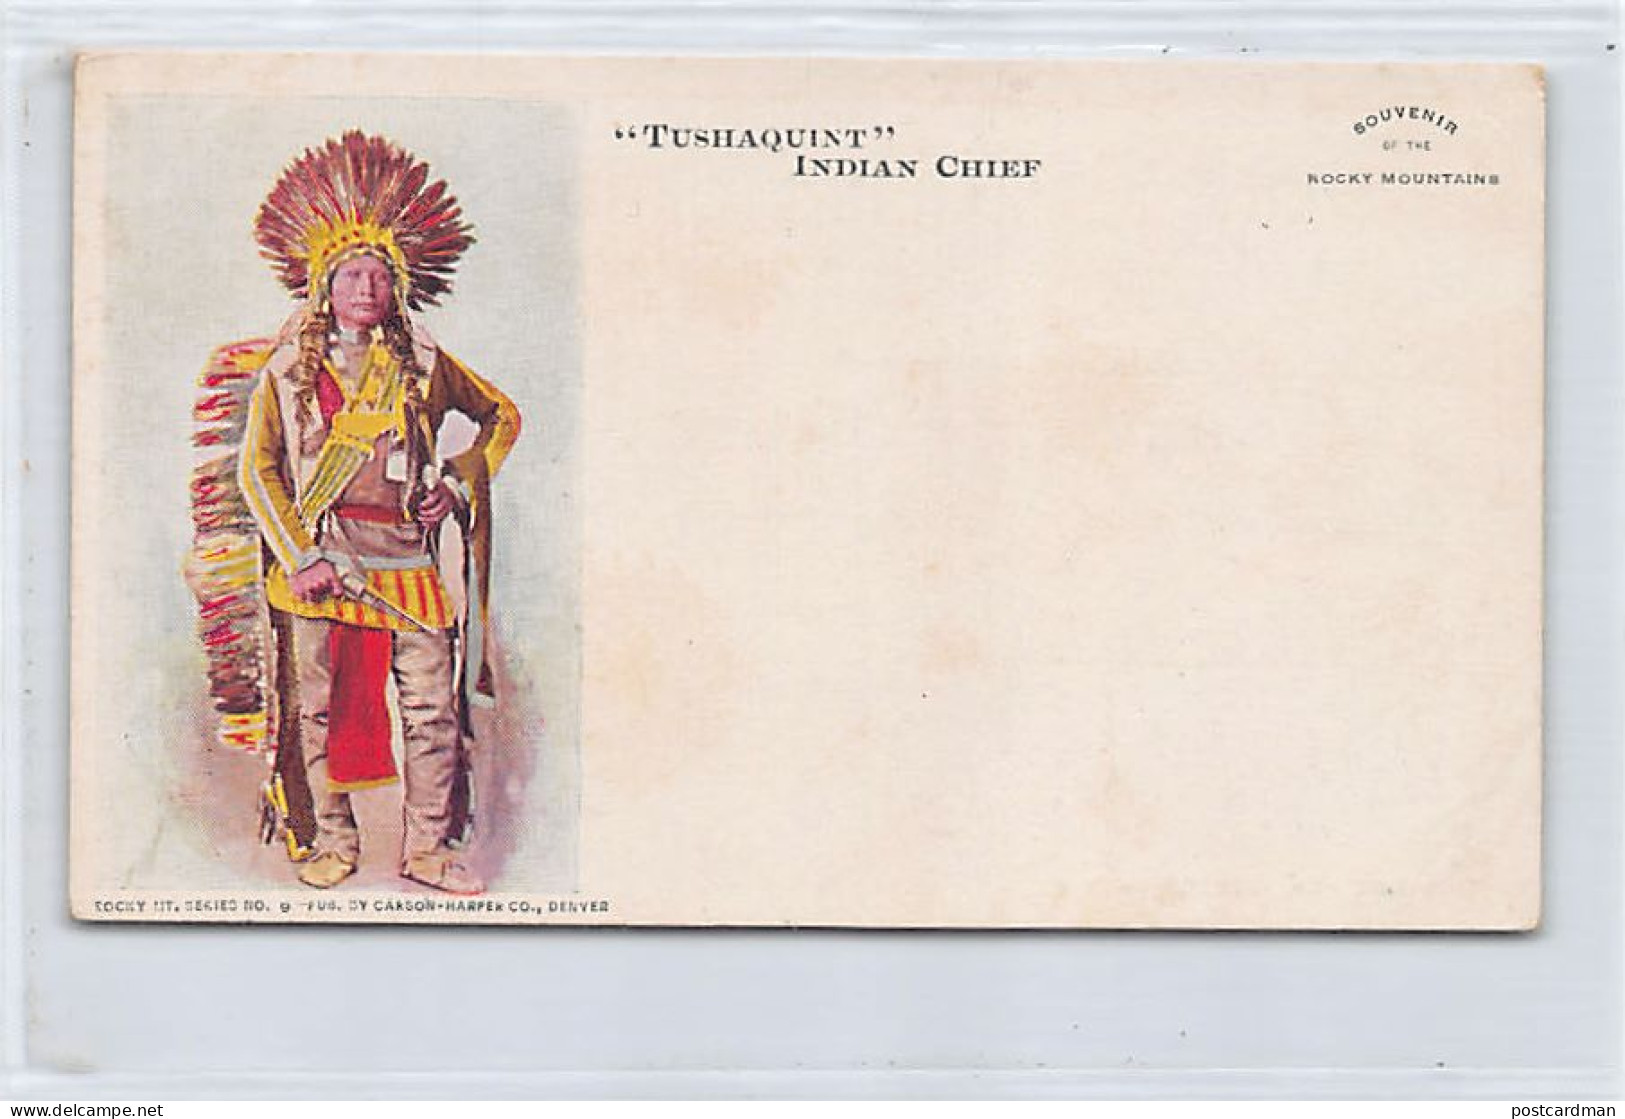 Usa - Native Americana - Tushaquint Indian Chief - PRIVATE MAILING CARD - Publ. Carson-Harper Co. Rocky Mt. Series - Indianer